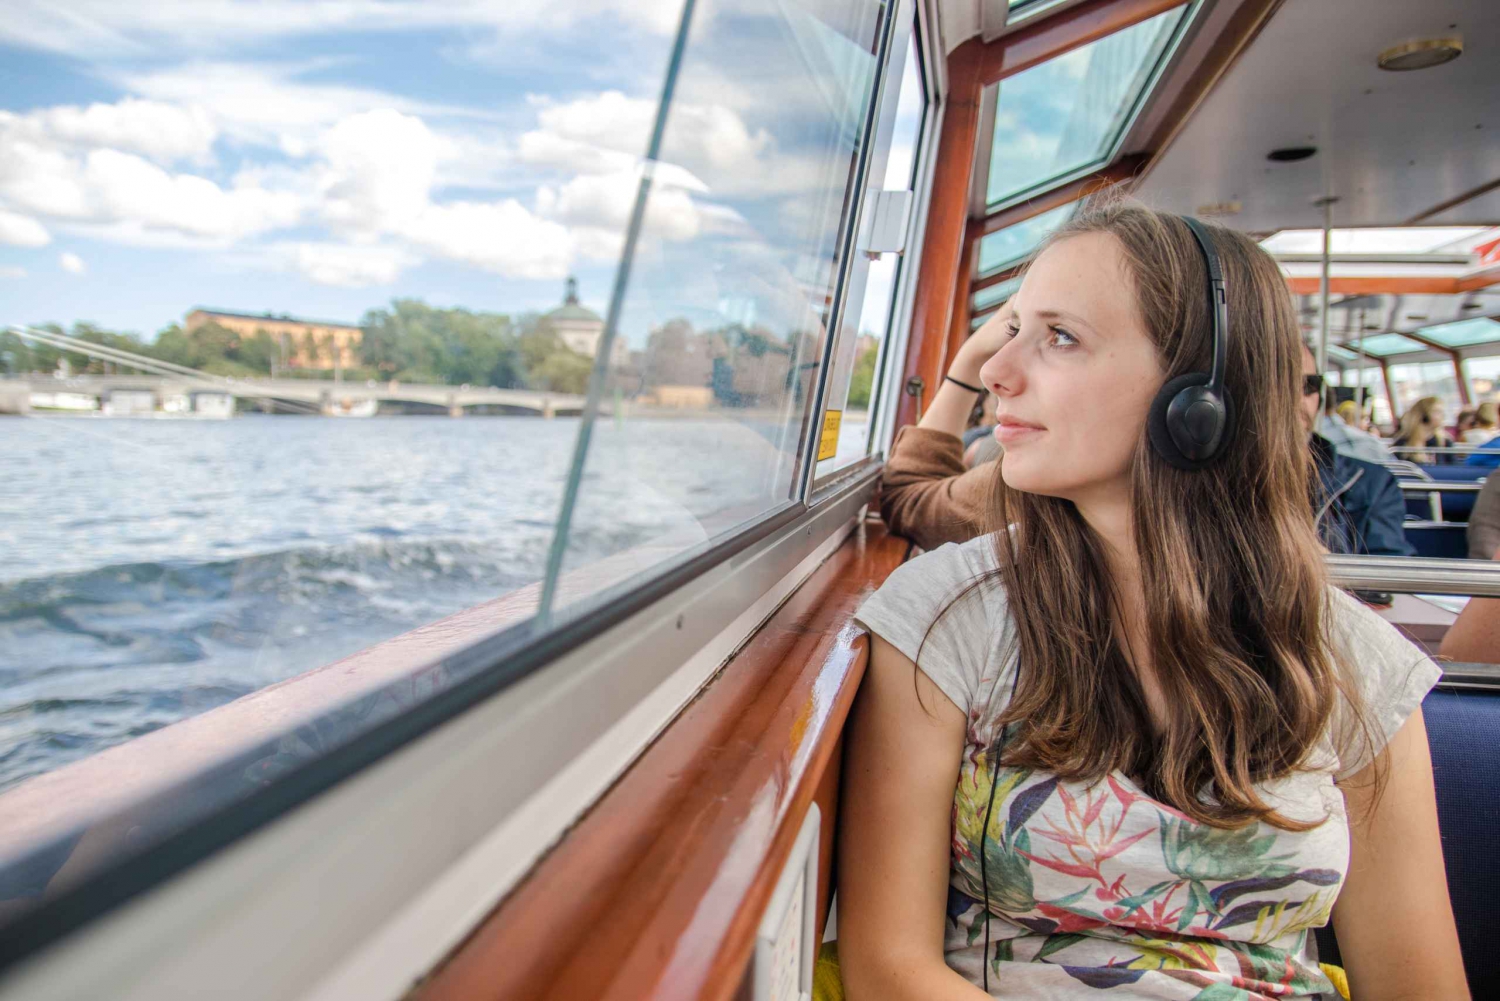 Royal Canal Tour - Explore Stockholm by Boat